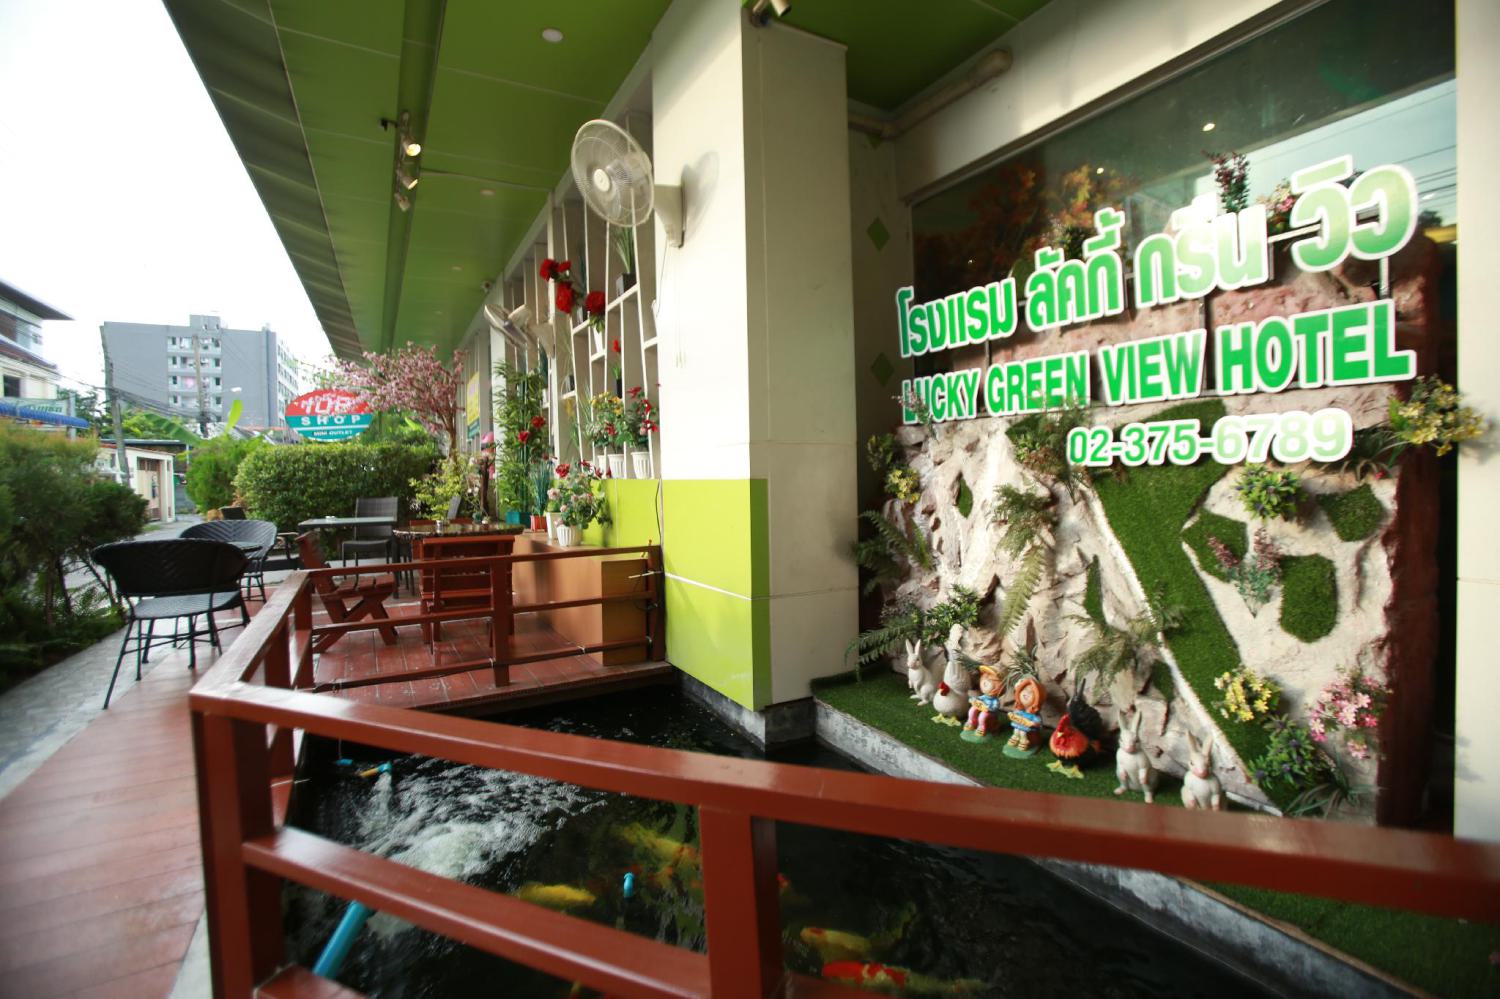 Lucky Green View Hotel - Image 3